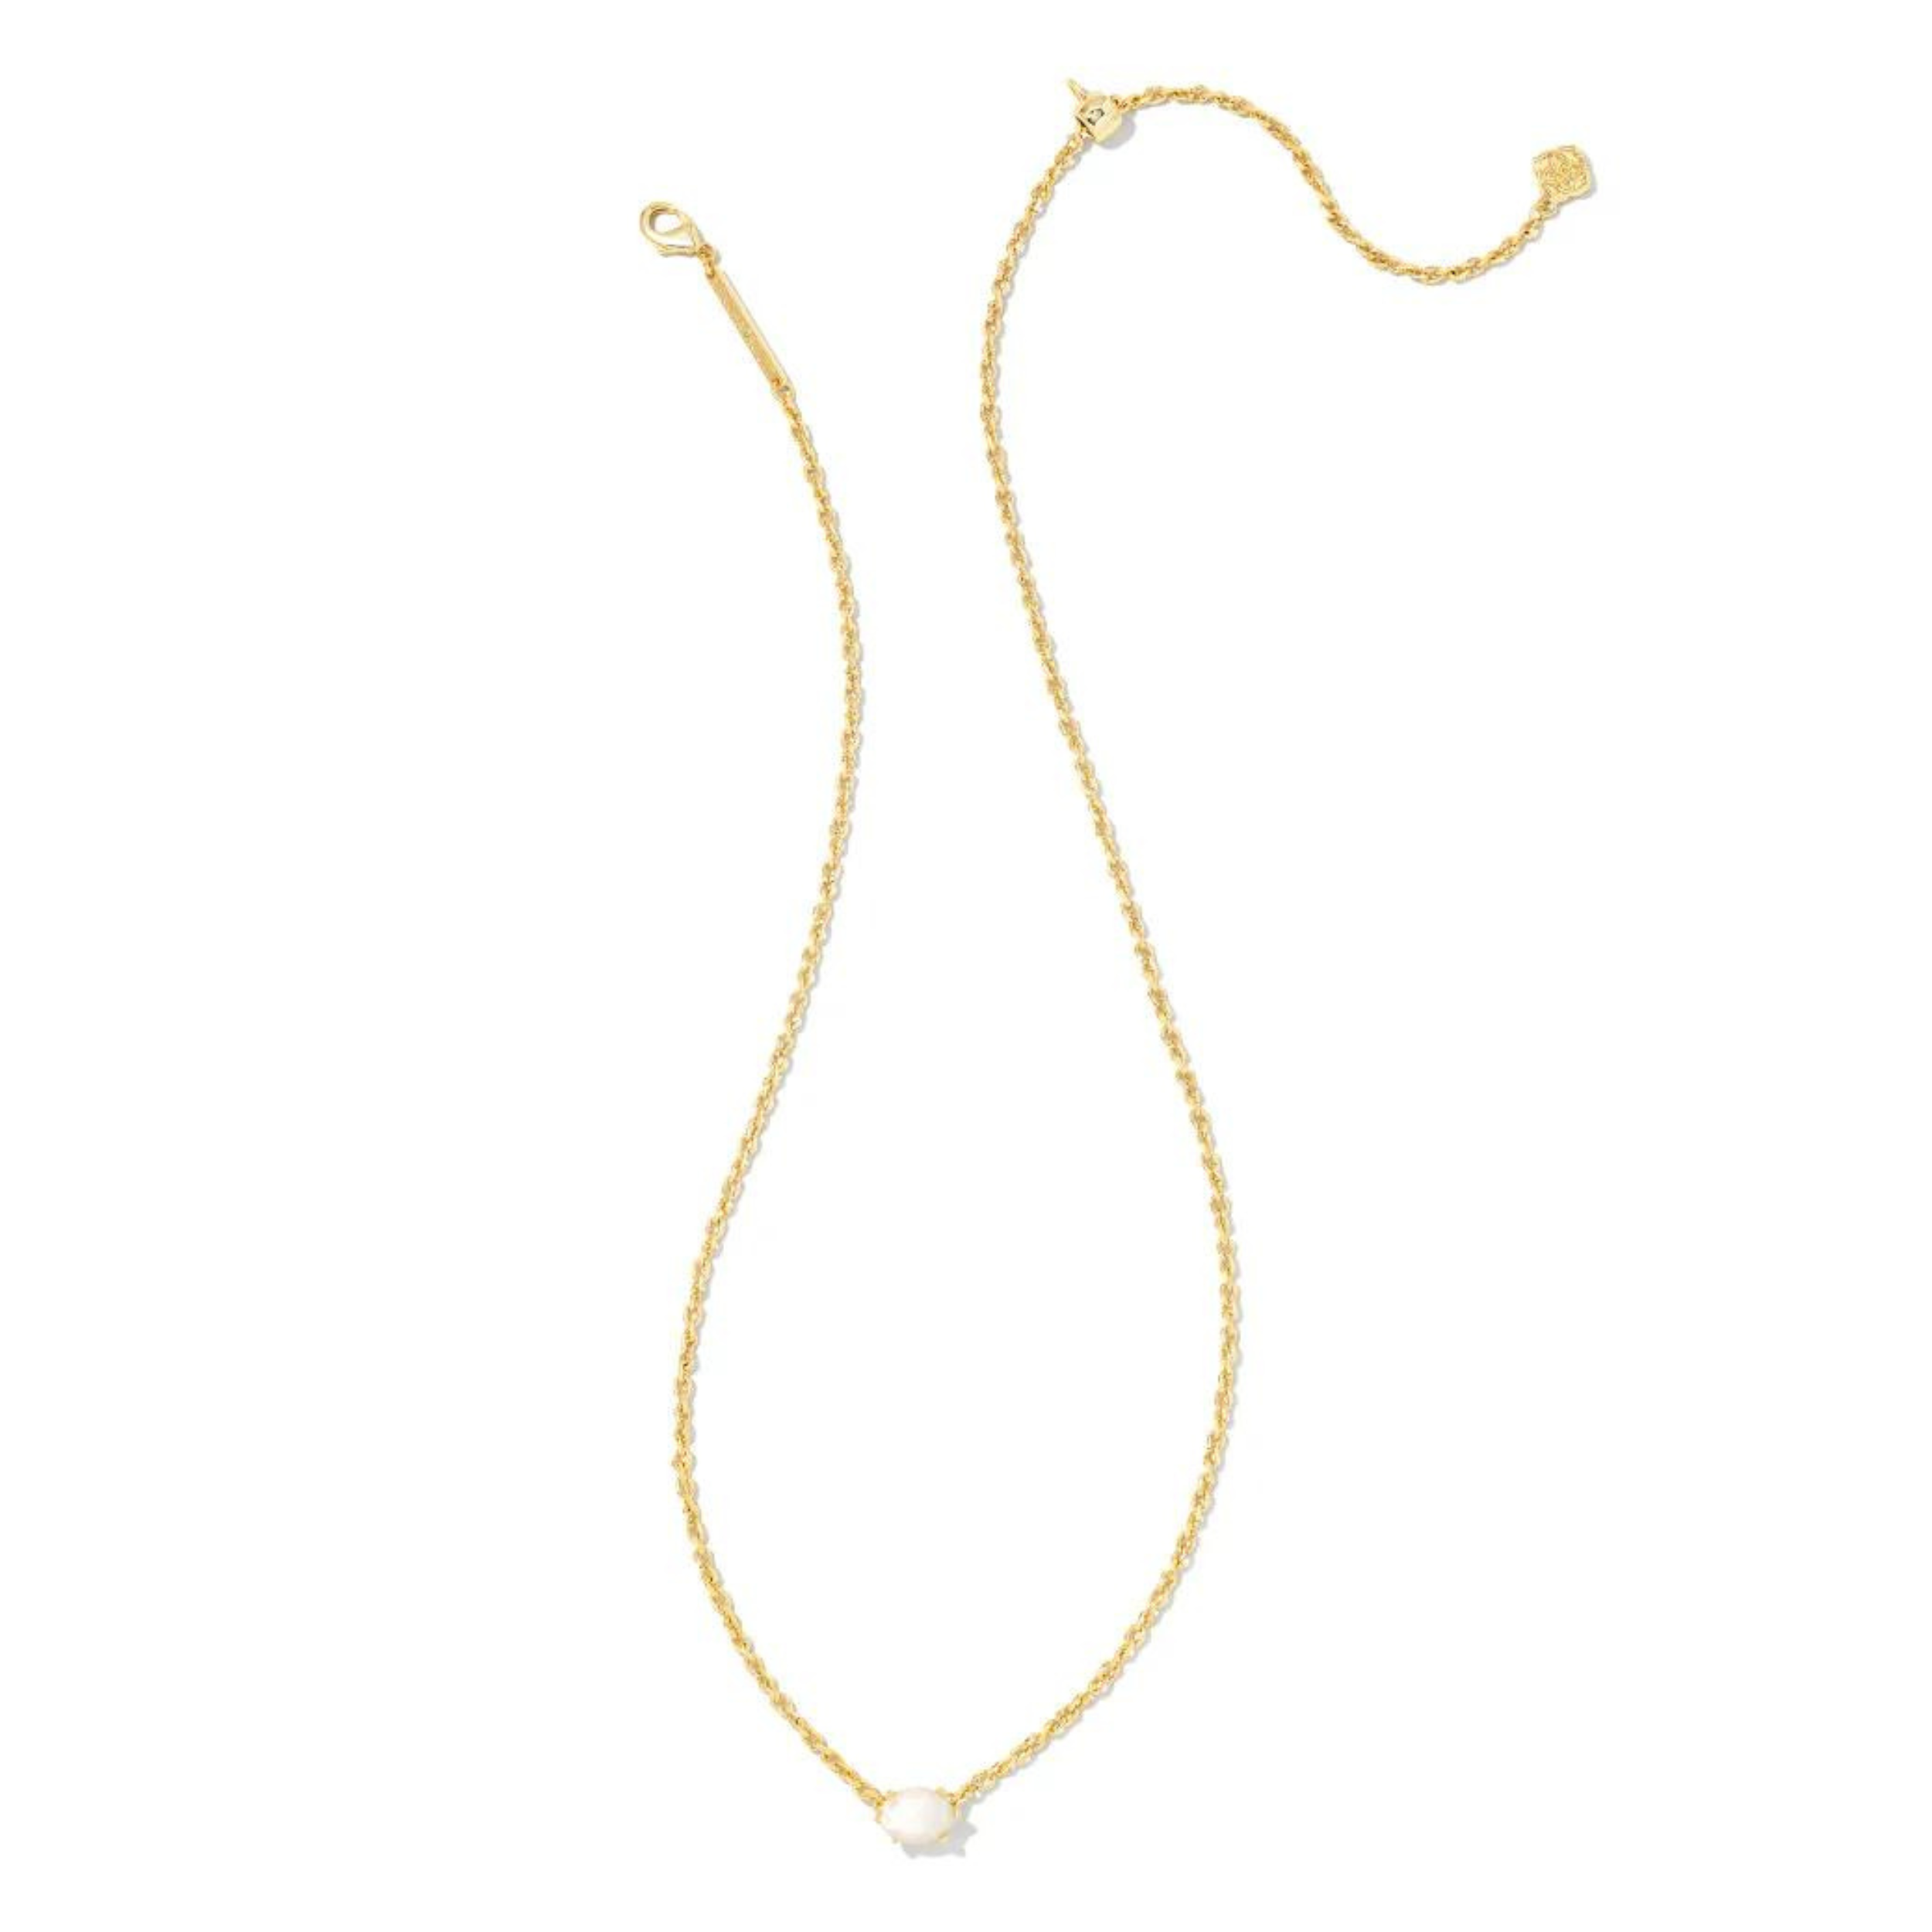 Kendra Scott | Cailin Gold Pendant Necklace in Ivory Mother-of-Pearl - Giddy Up Glamour Boutique